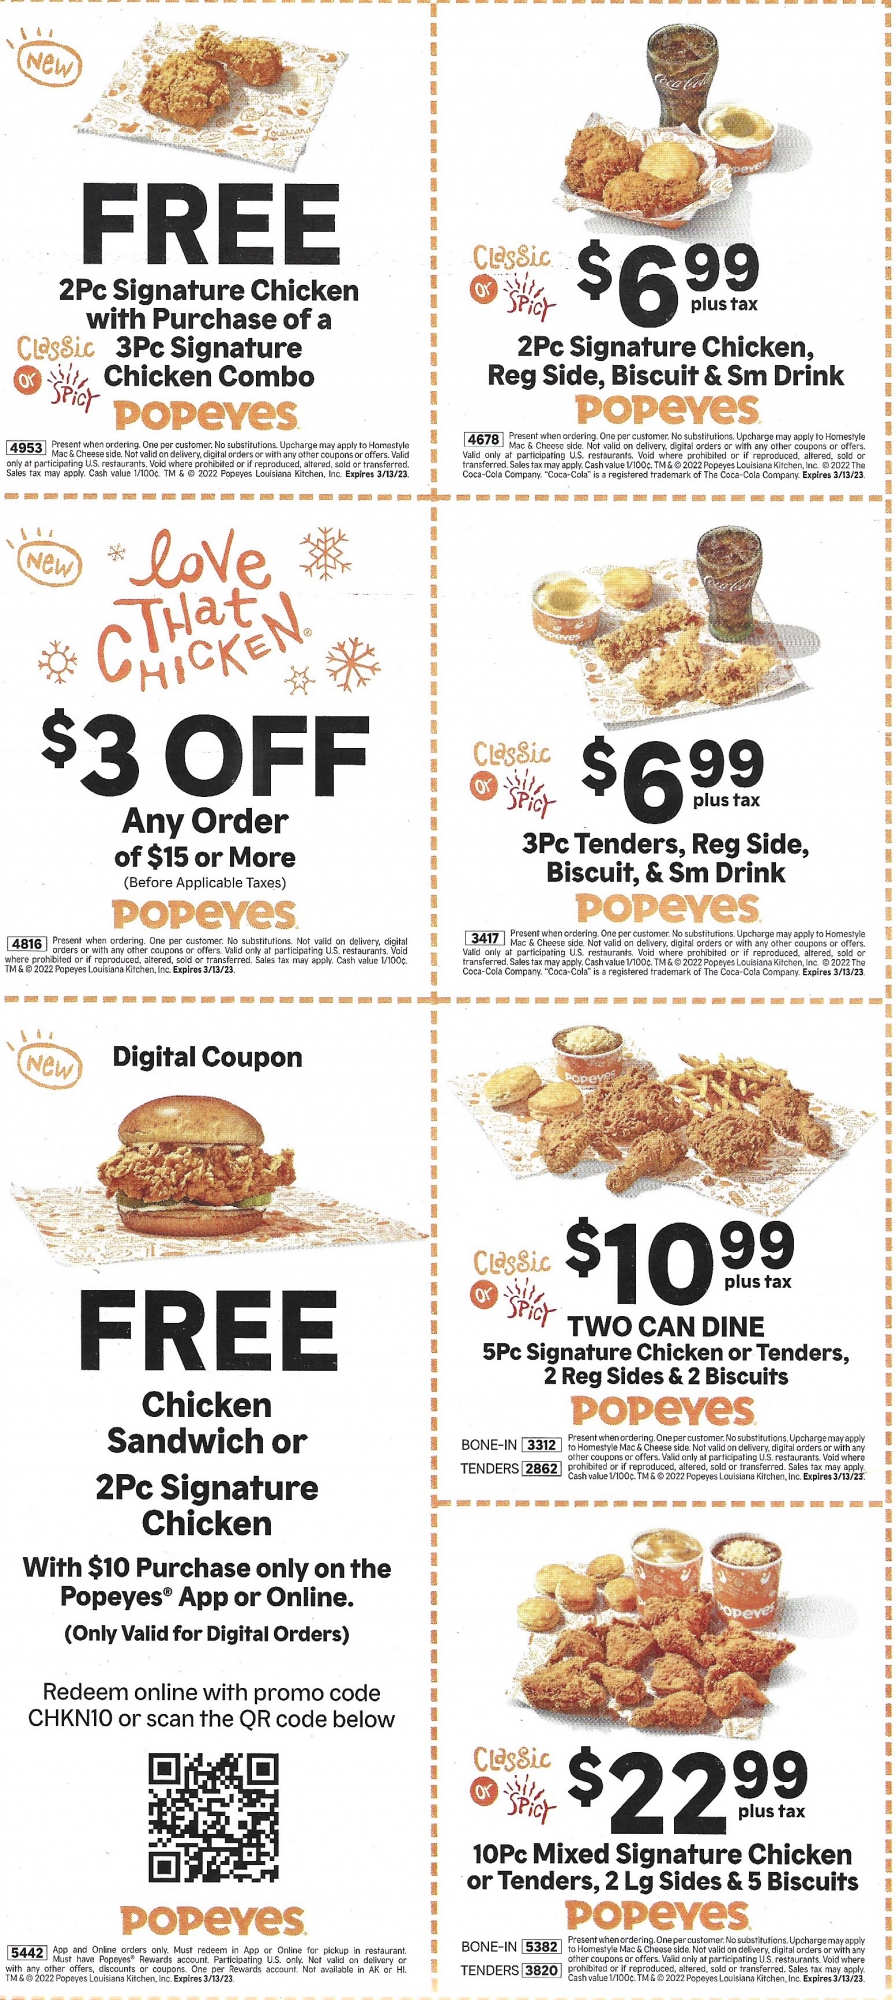 Popeyes Chicago Deals Coupons December 2022 Expires 3-13-2022 2